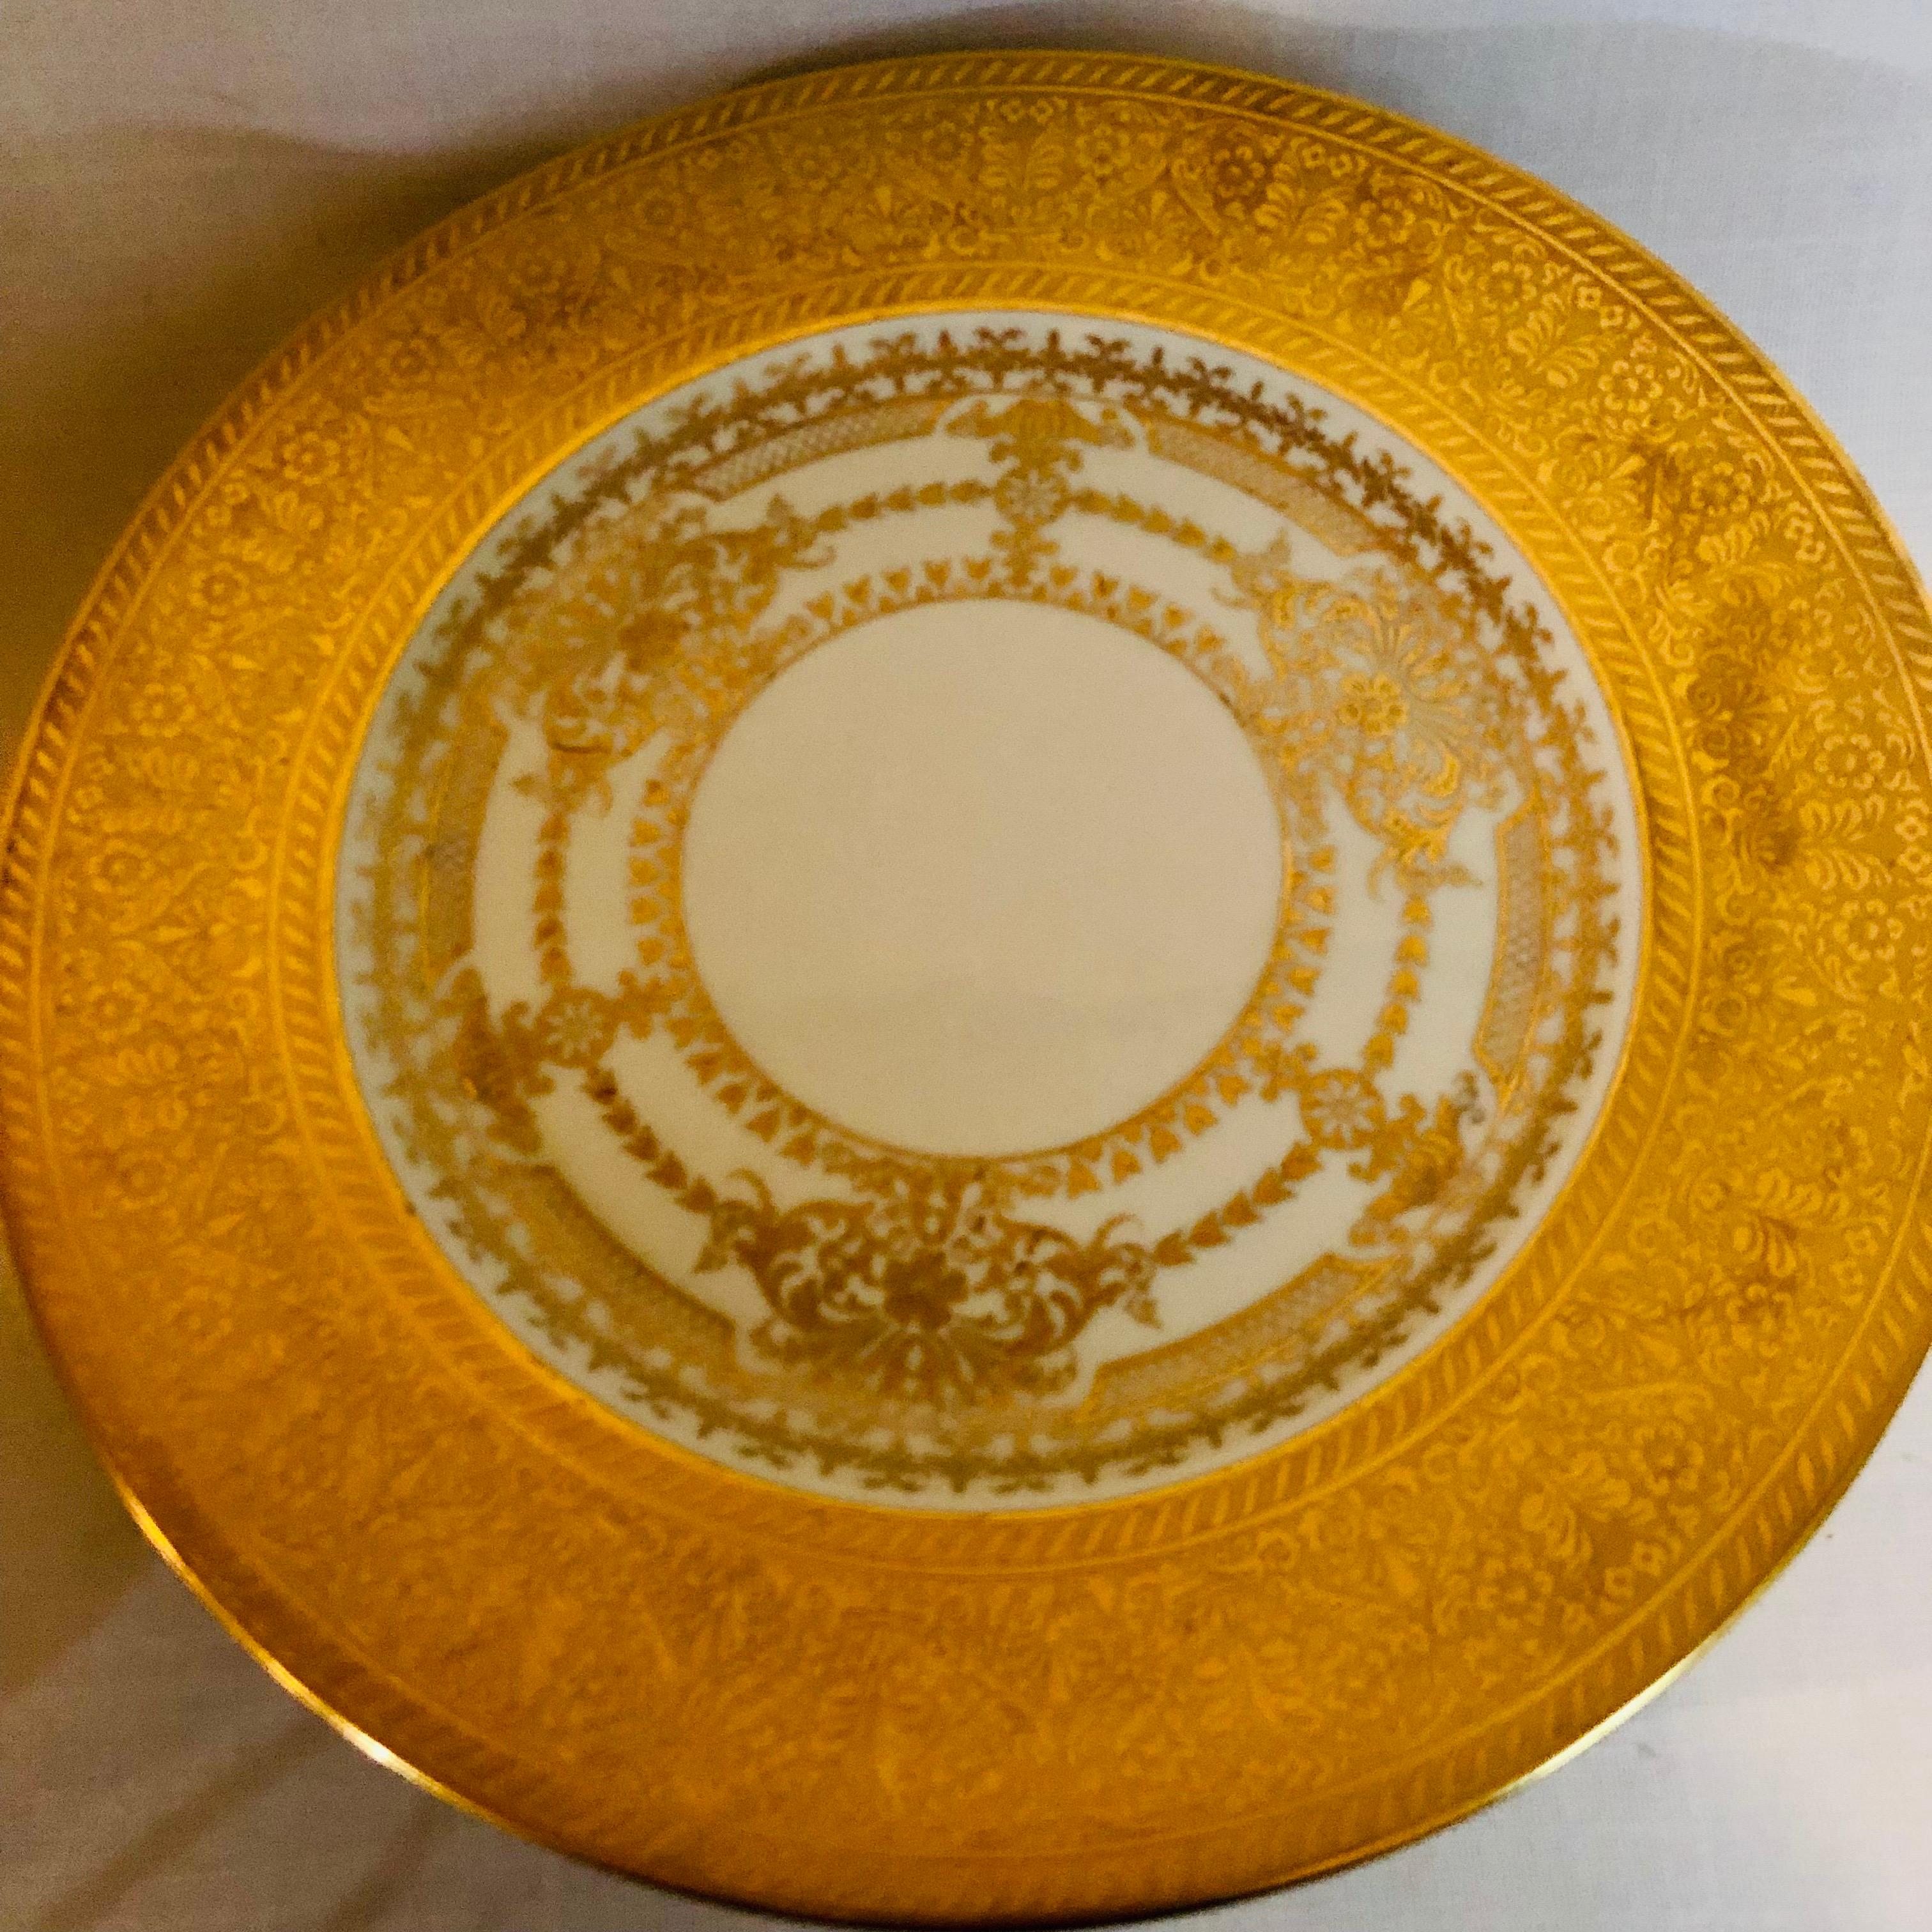 Set of 8 Bavarian Service Plates with Thick Border of Gold Embossed Decoration 1